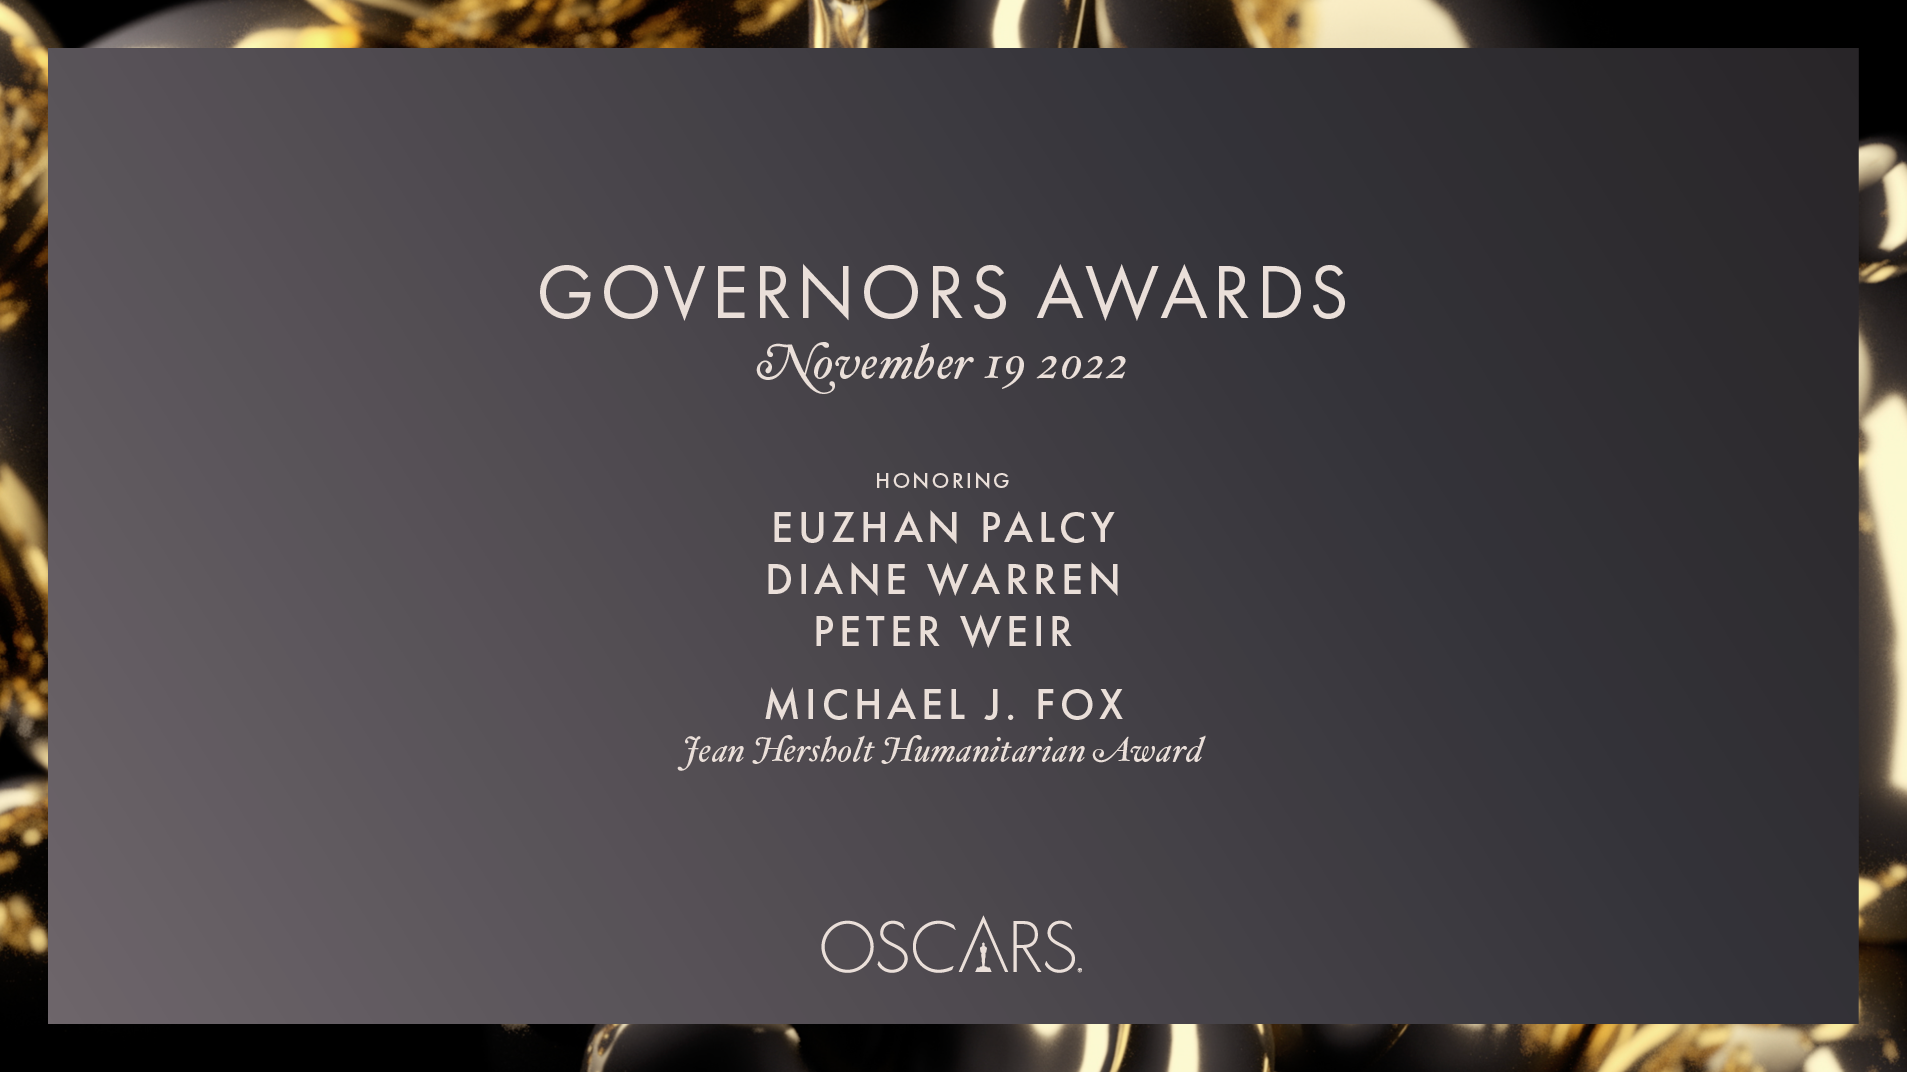 THE ACADEMY TO HONOR MICHAEL J. FOX, EUZHAN PALCY,  DIANE WARREN AND PETER WEIR WITH OSCARS®  AT GOVERNORS AWARDS IN NOVEMBER